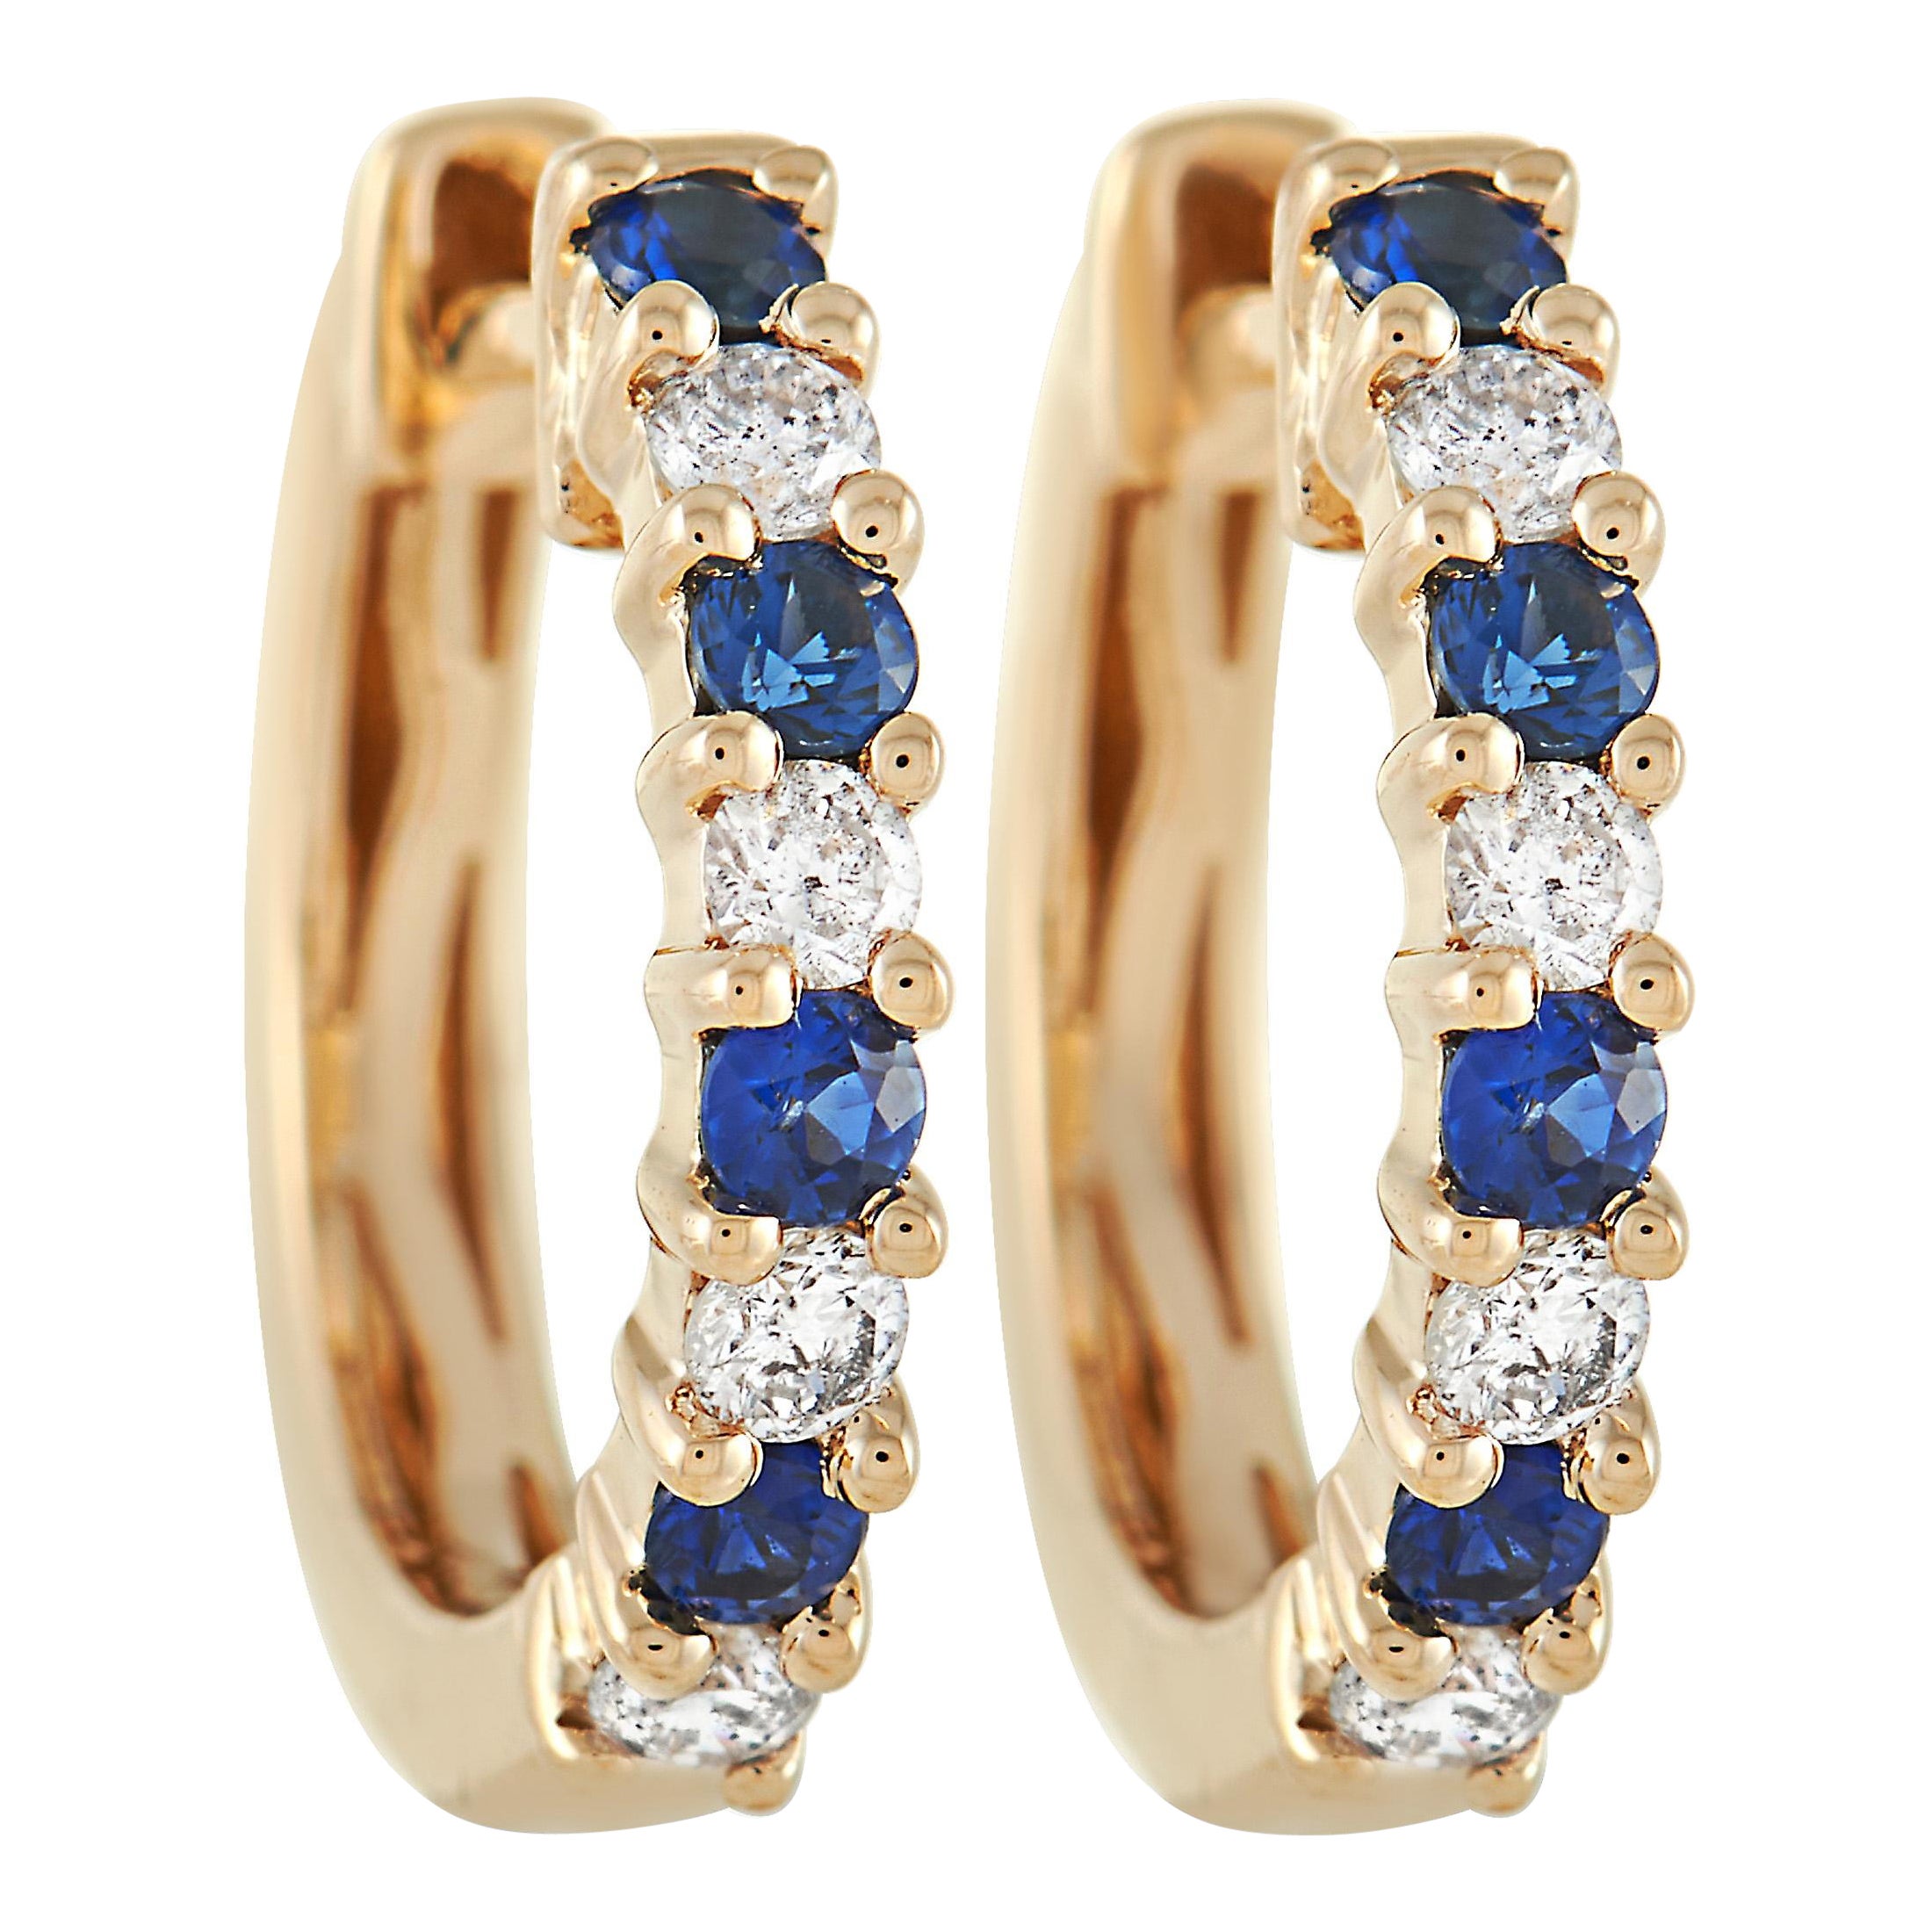 LB Exclusive 14K Yellow Gold 0.17 Ct Diamond and Sapphire Hoop Earrings